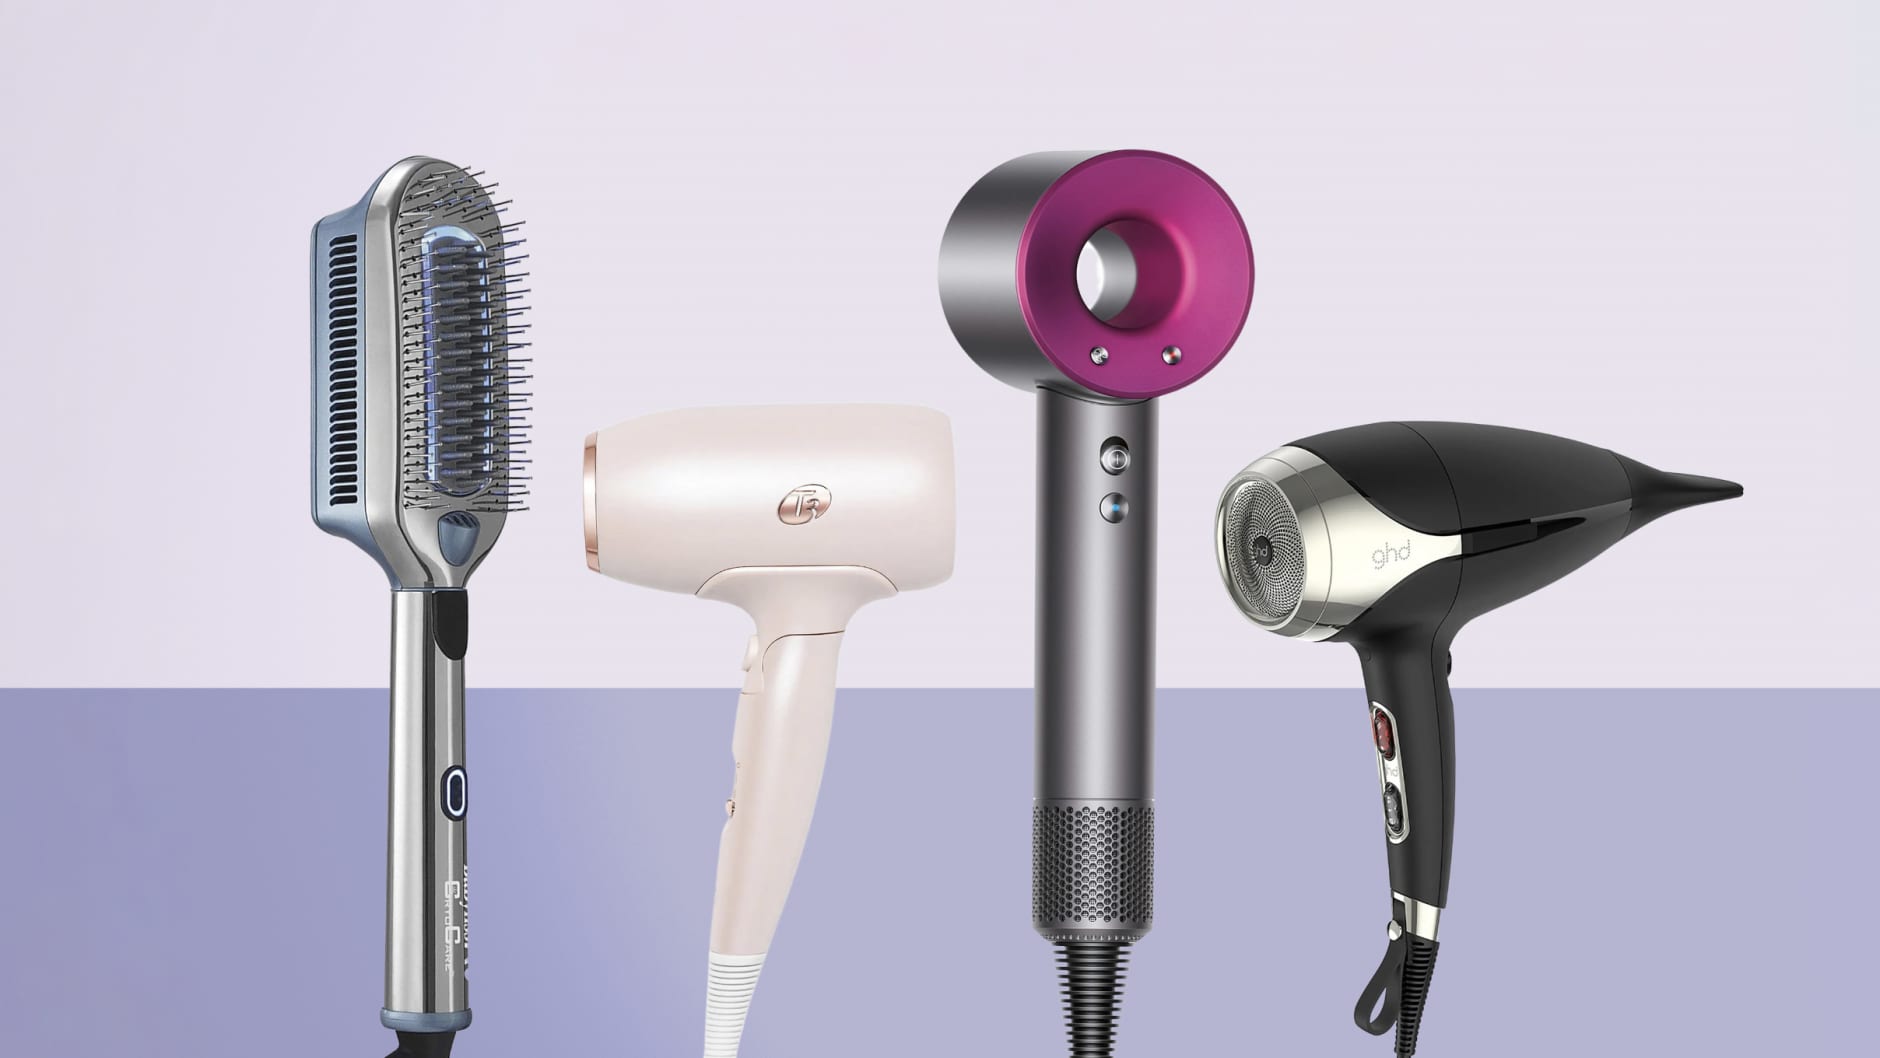 The T3 Afar, Dyson Supersonic and GHD Helios 1875 hairdryers on a purple background.